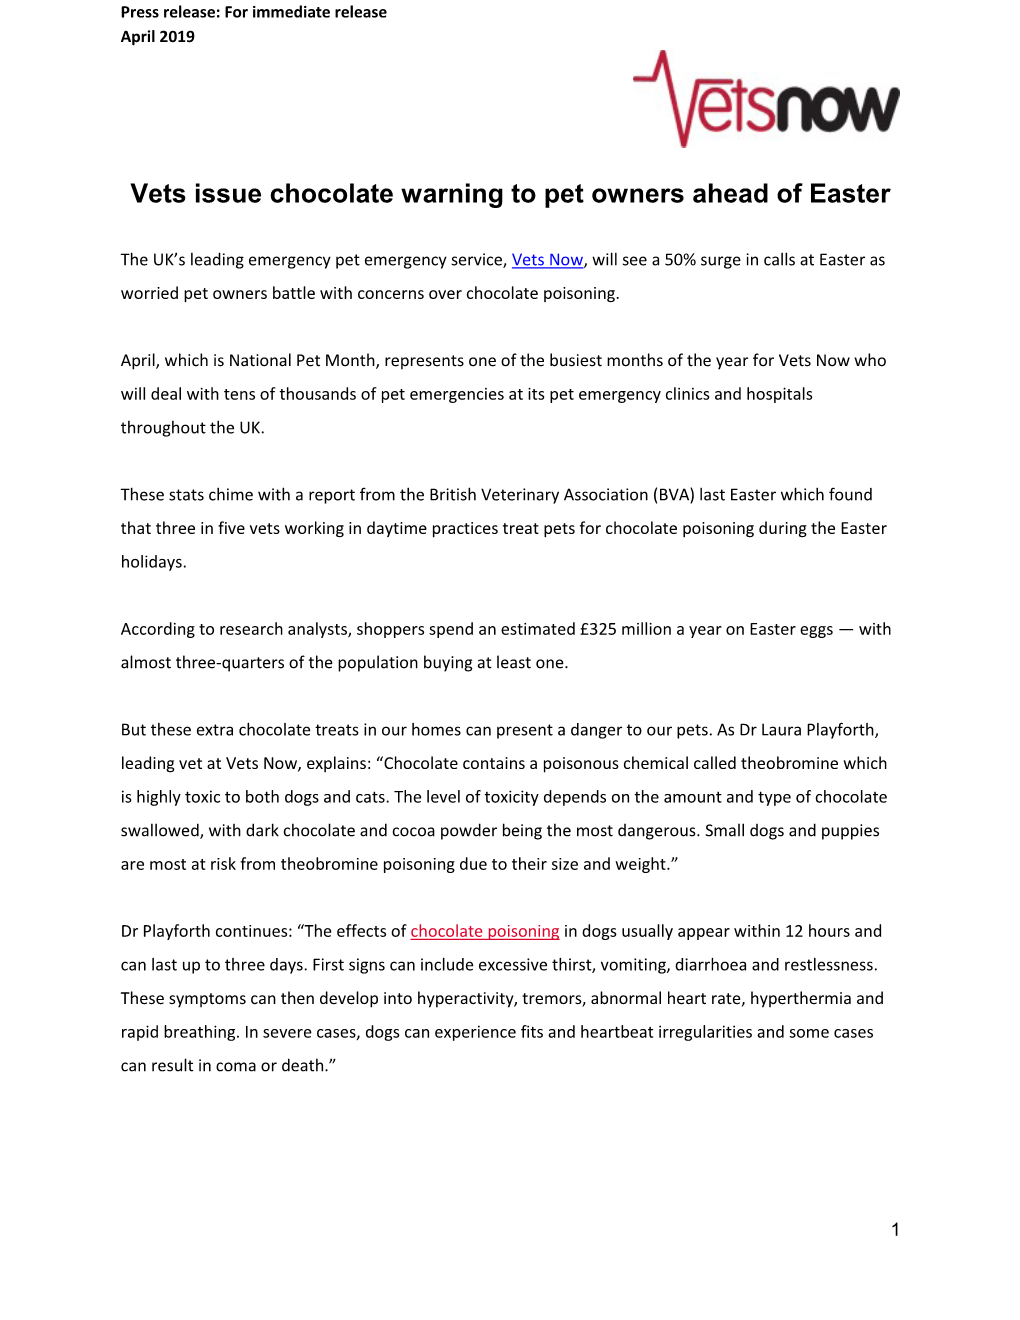 Vets Issue Chocolate Warning to Pet Owners Ahead of Easter